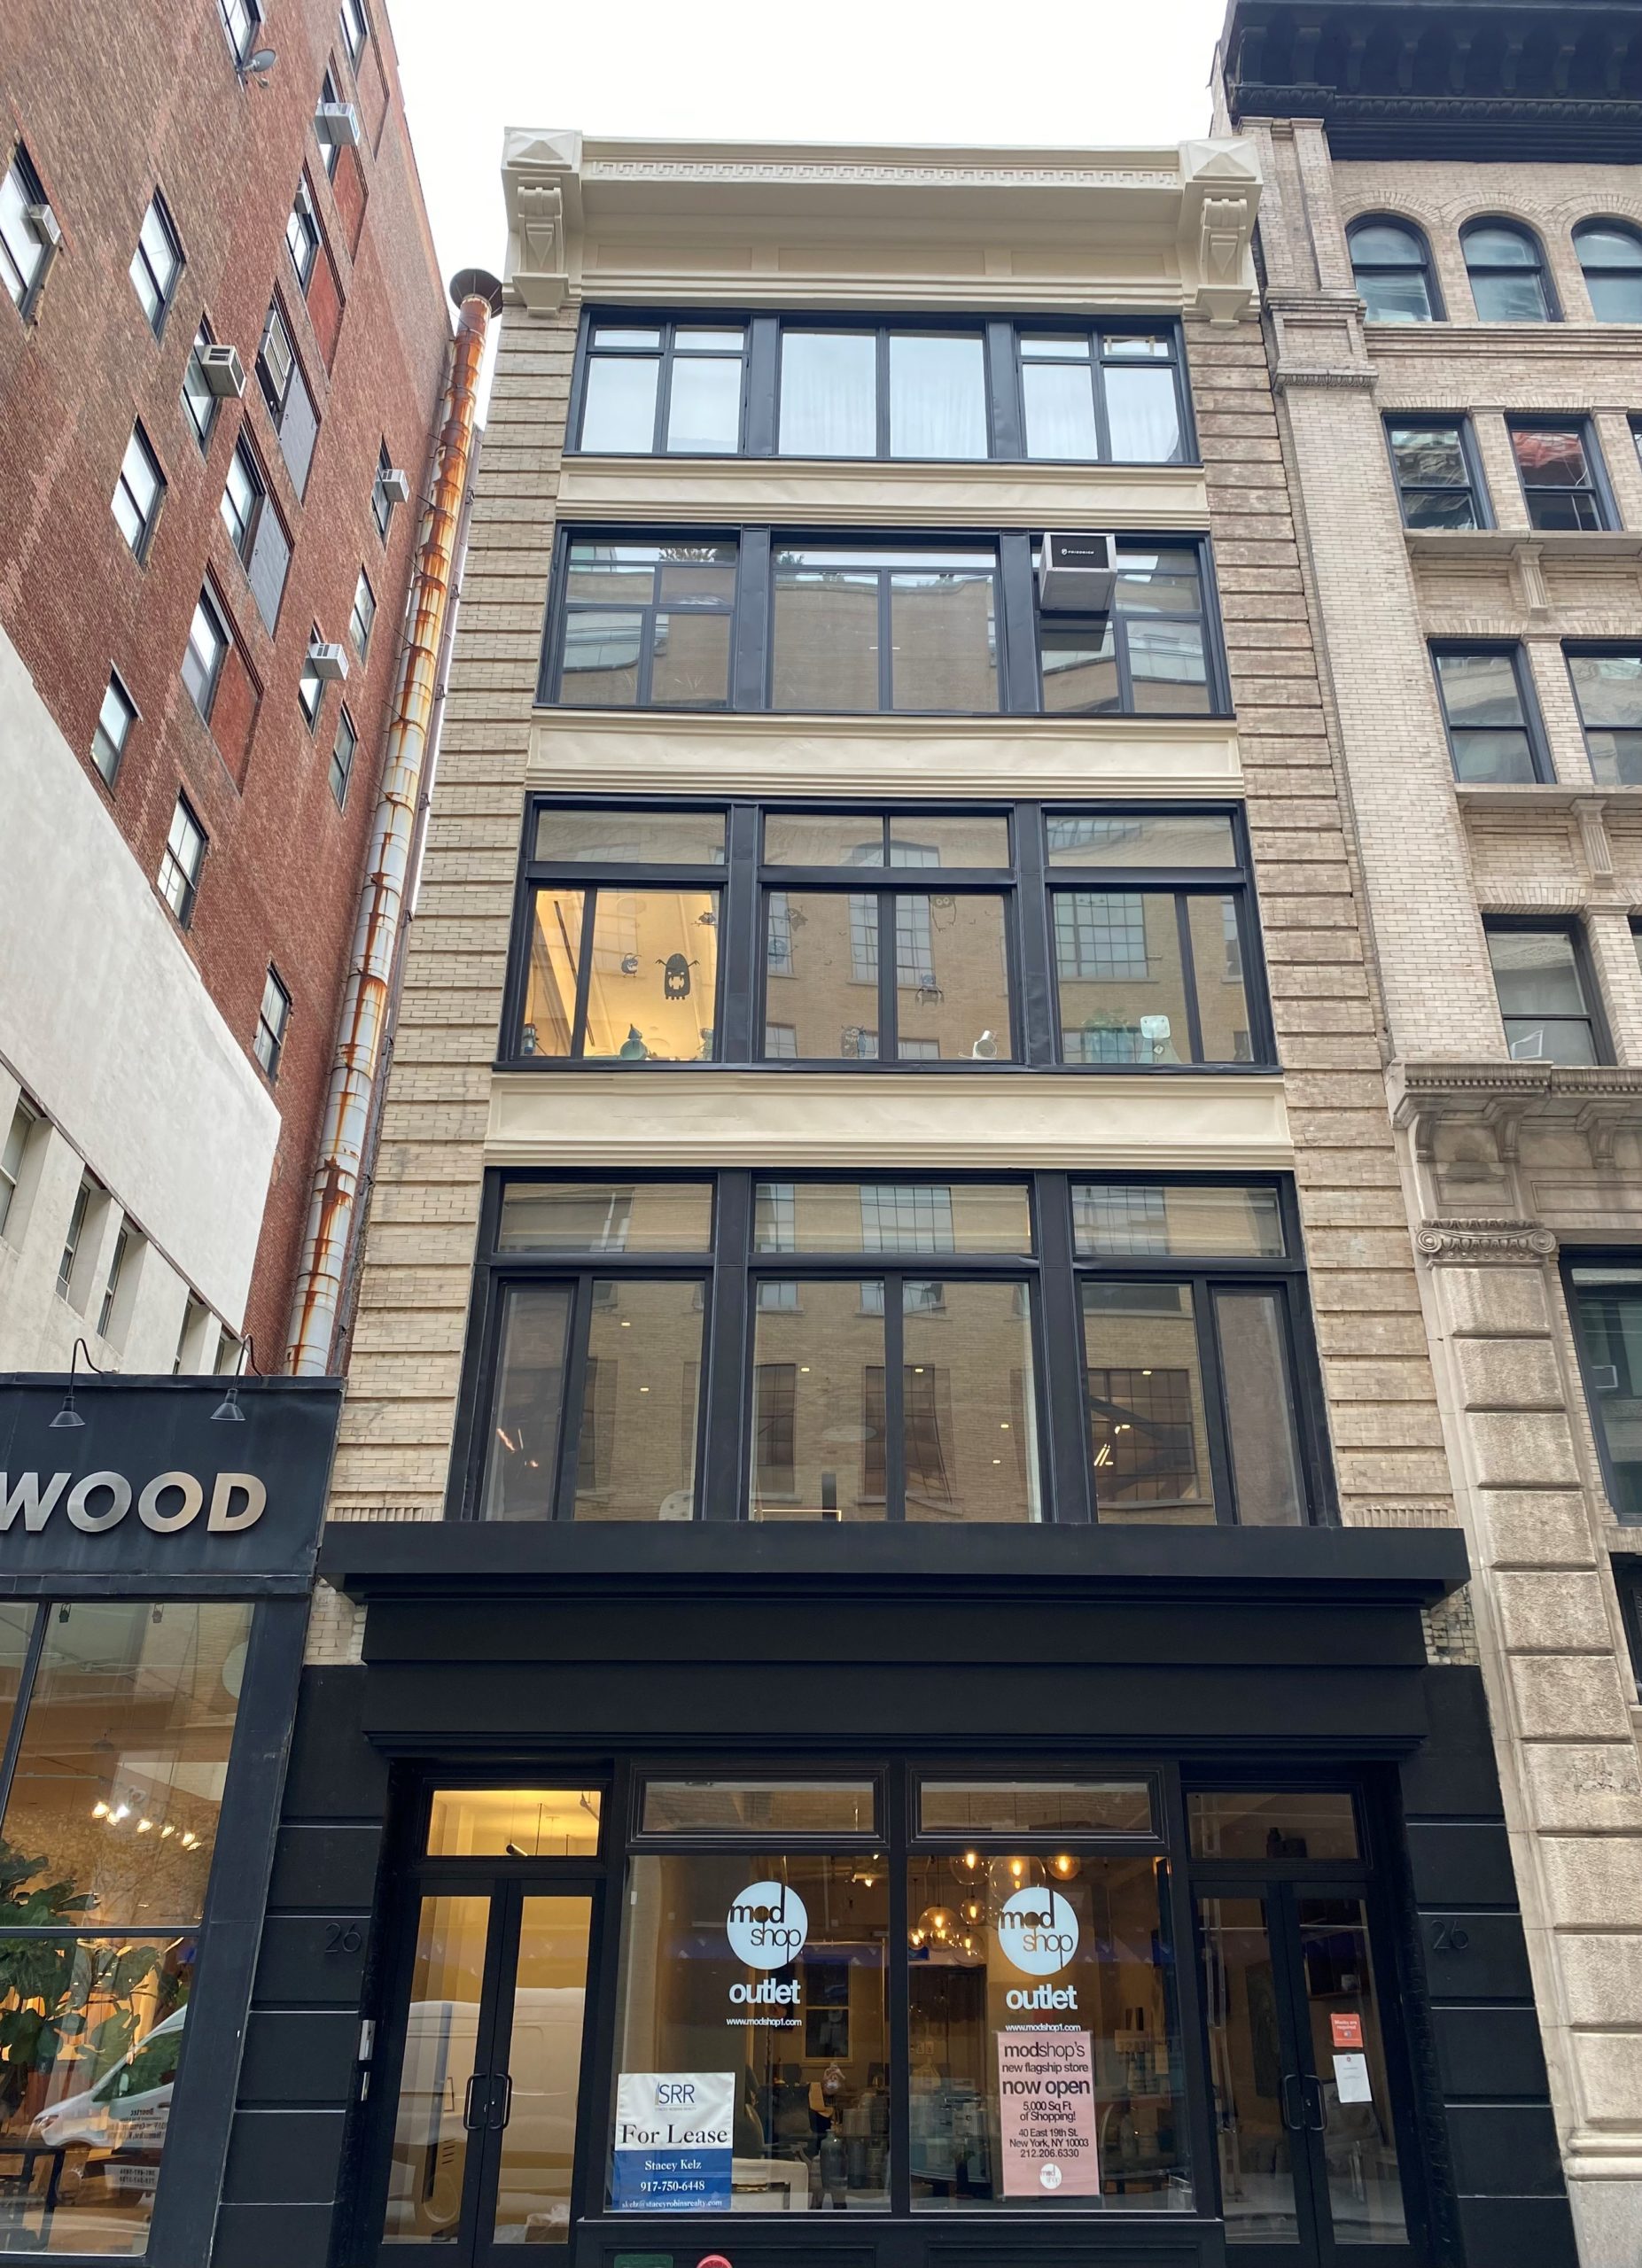 26 West 20th Street, Hill Property Partners